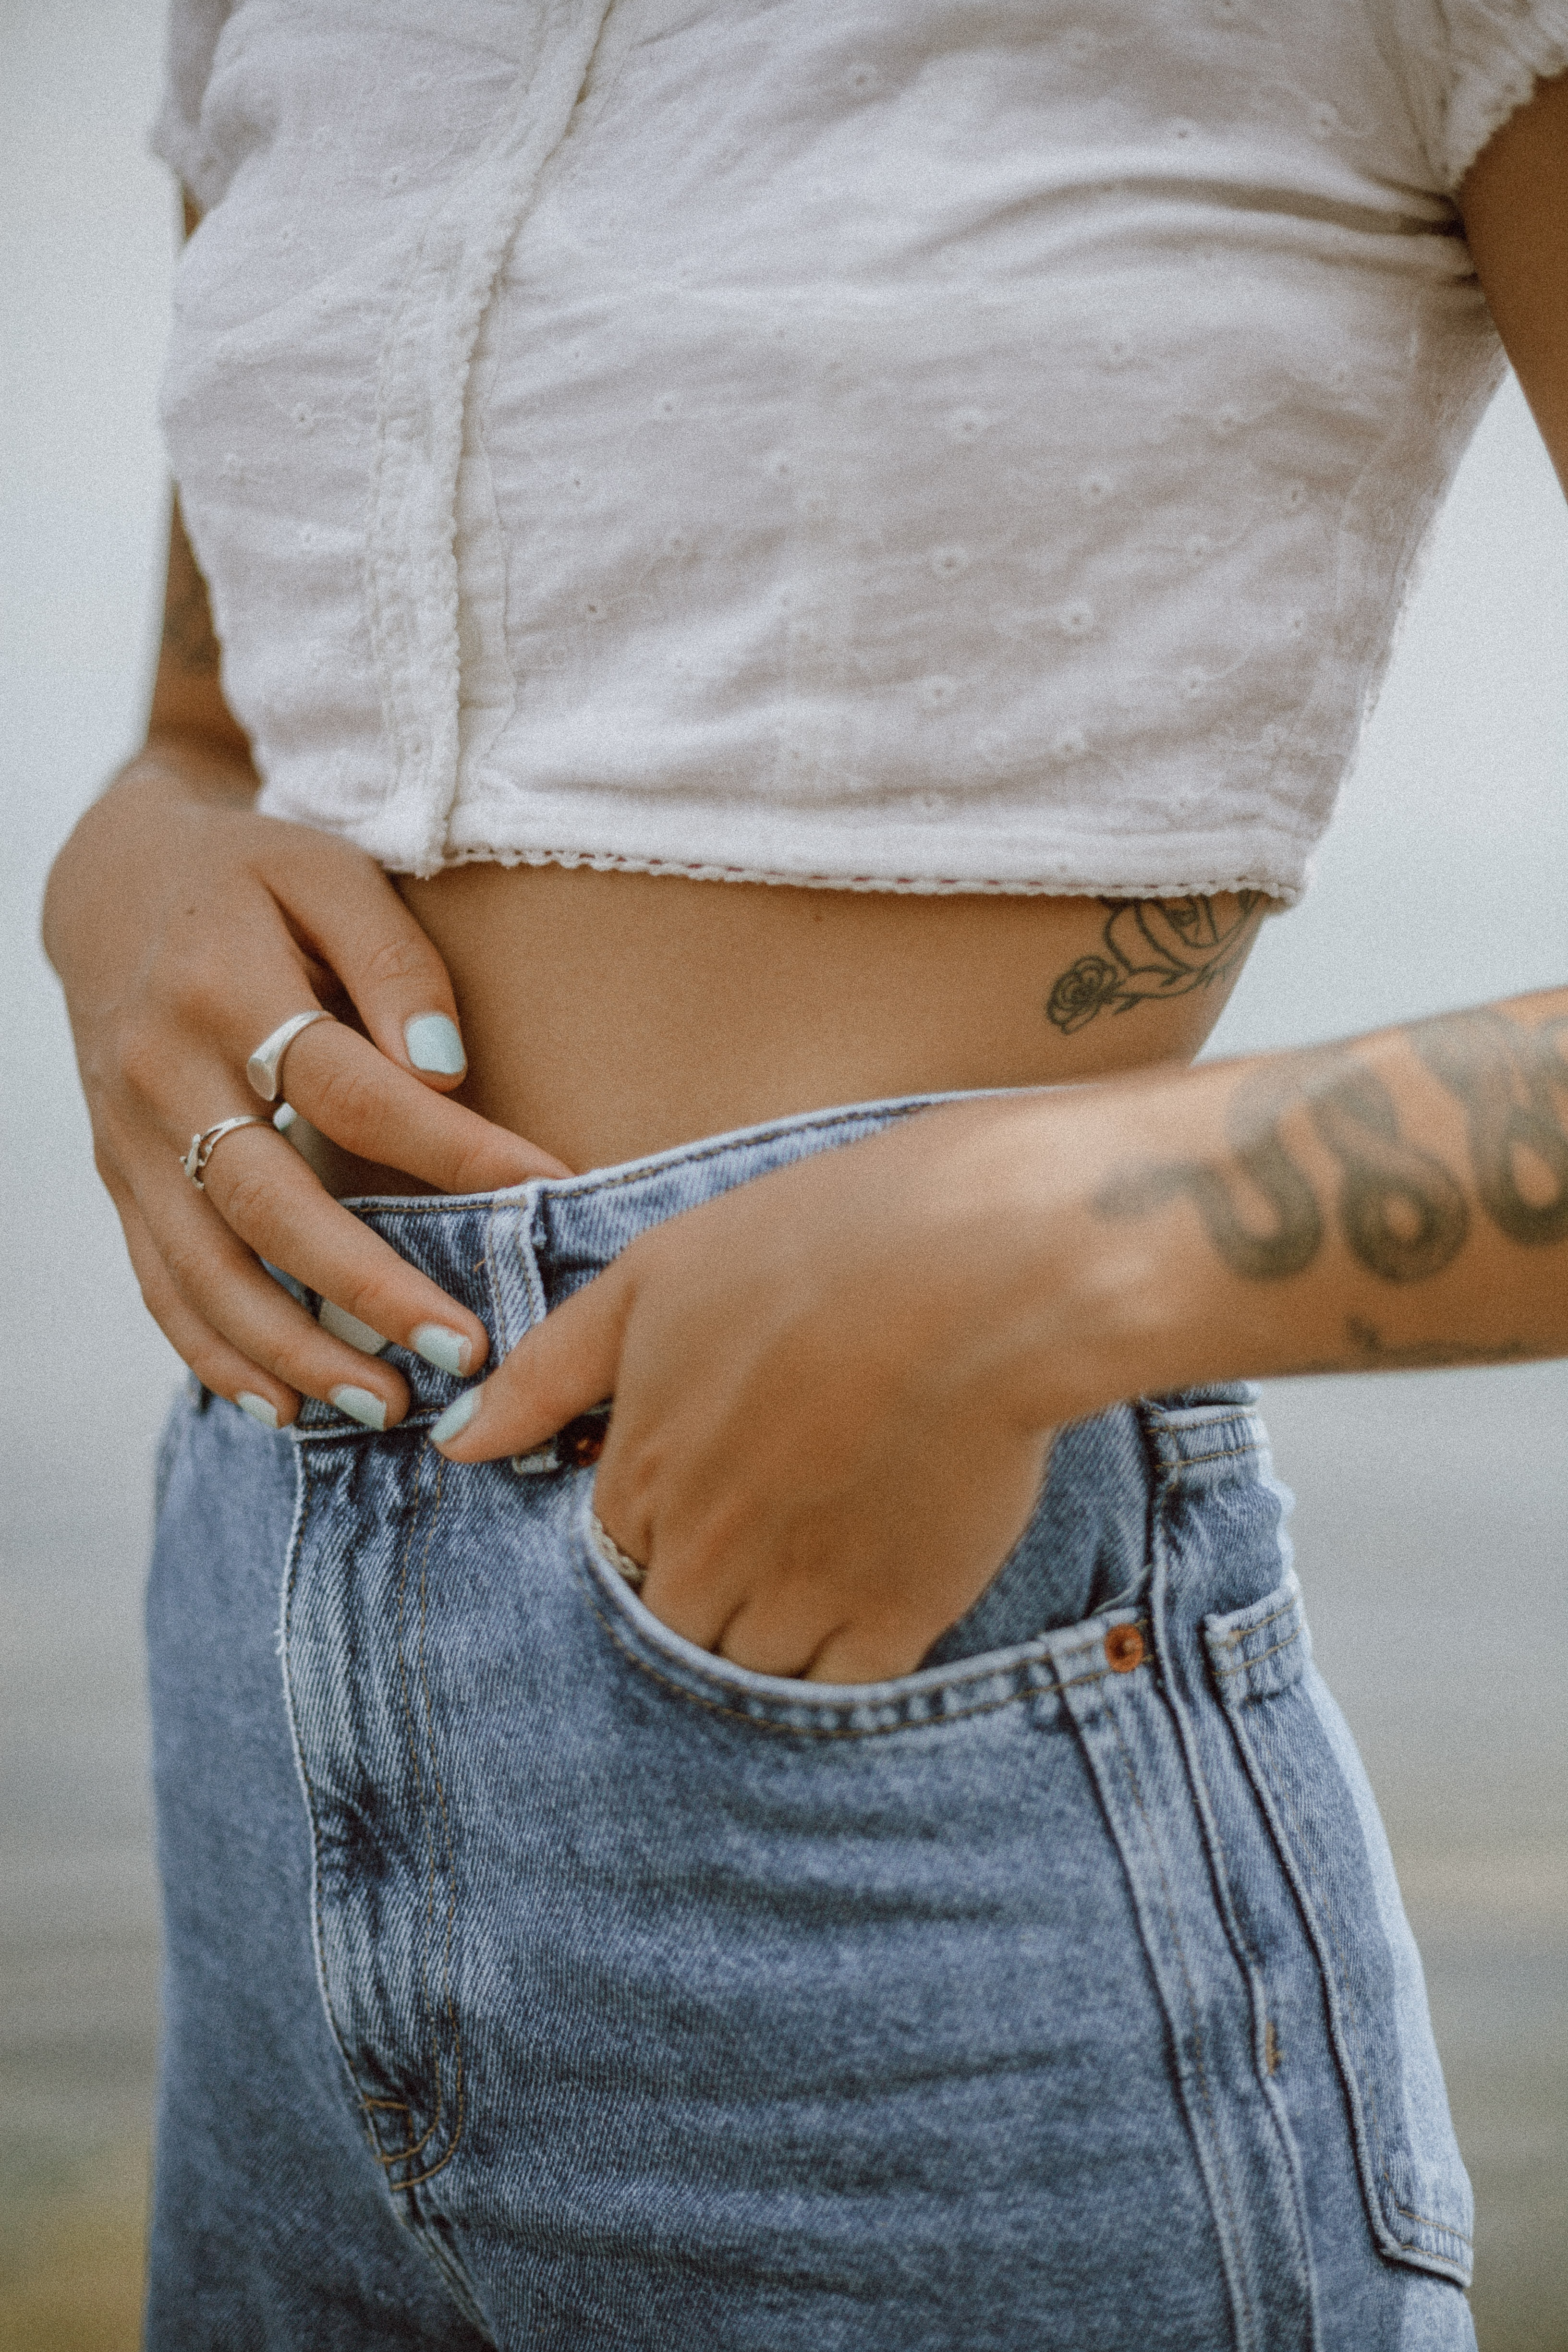 Blue Jeans and Crop Top Pose